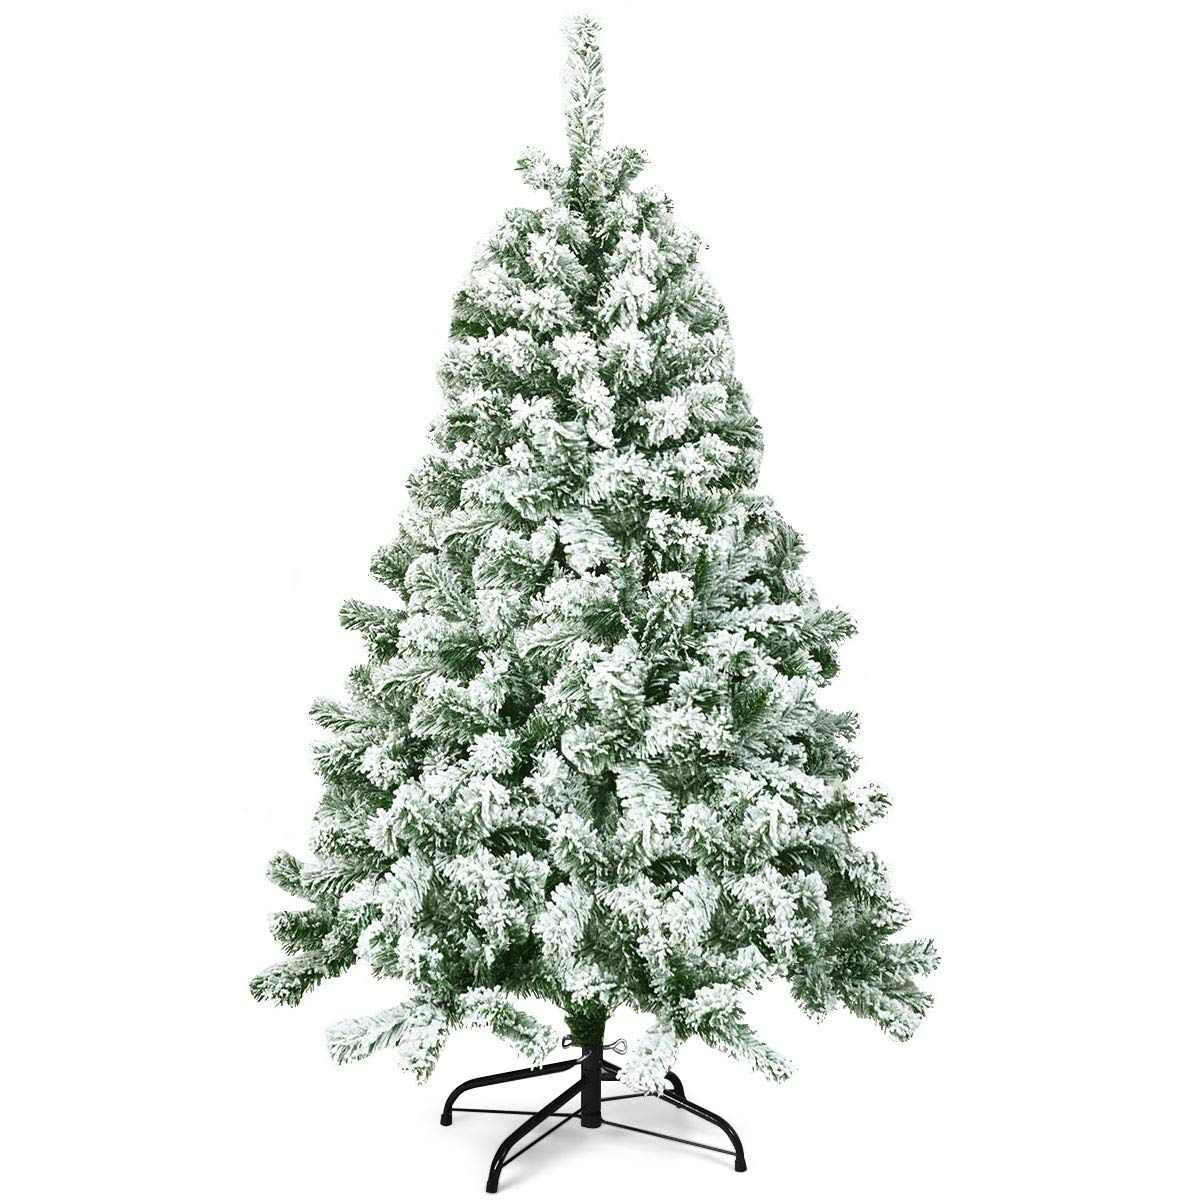 Goplus 4.5FT Snow Flocked Christmas Tree, Artificial Hinged Pine Tree with Premium PVC Needles & Solid Foldable Metal Stand